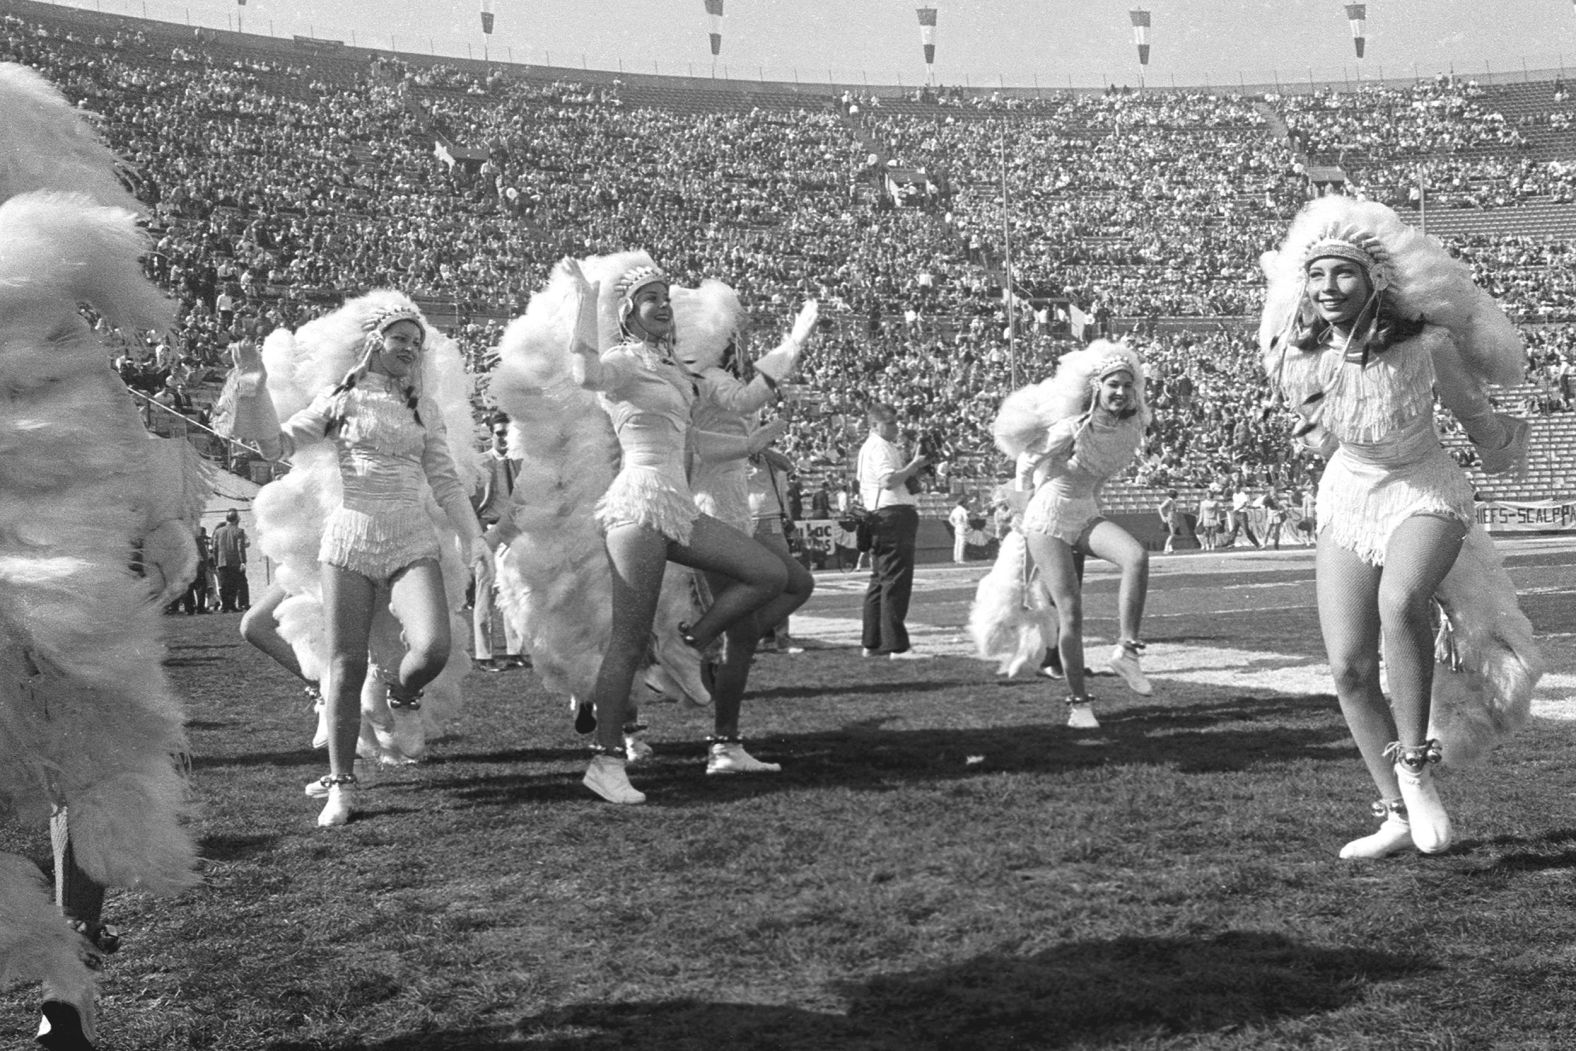 Cheerleaders perform during the game.